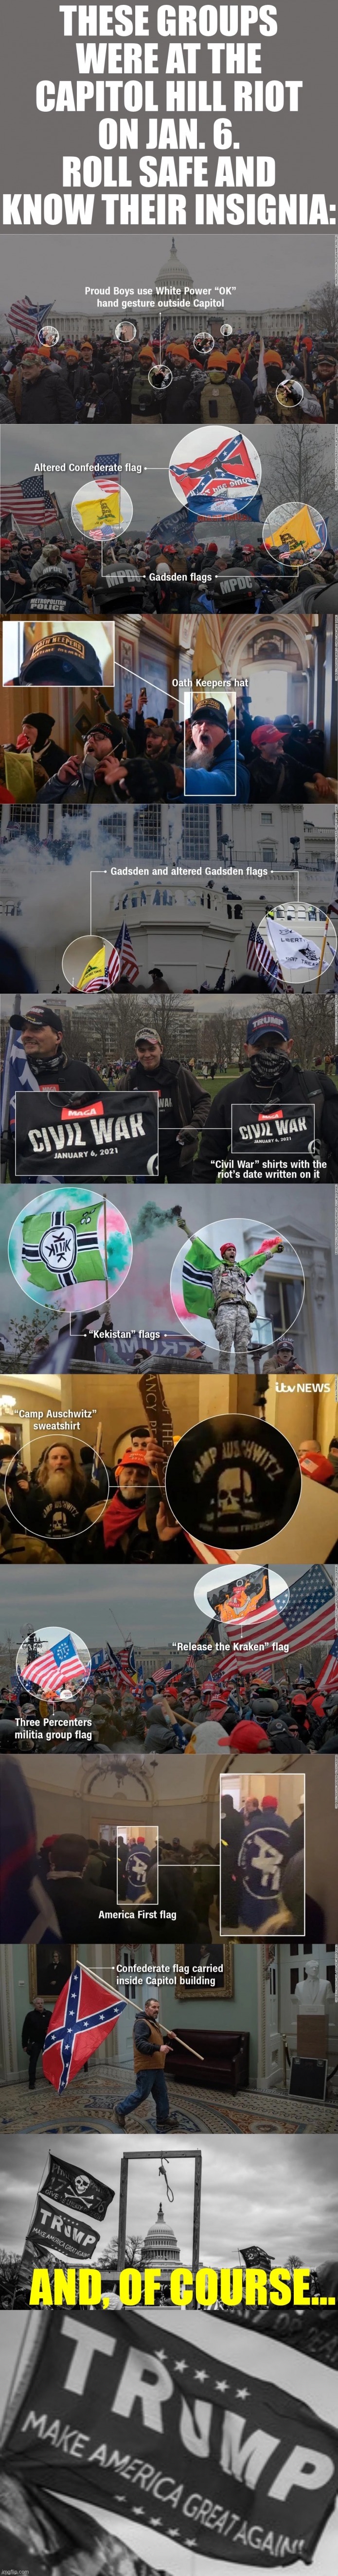 Keep these symbols in mind. | image tagged in capitol hill riot groups insignia | made w/ Imgflip meme maker